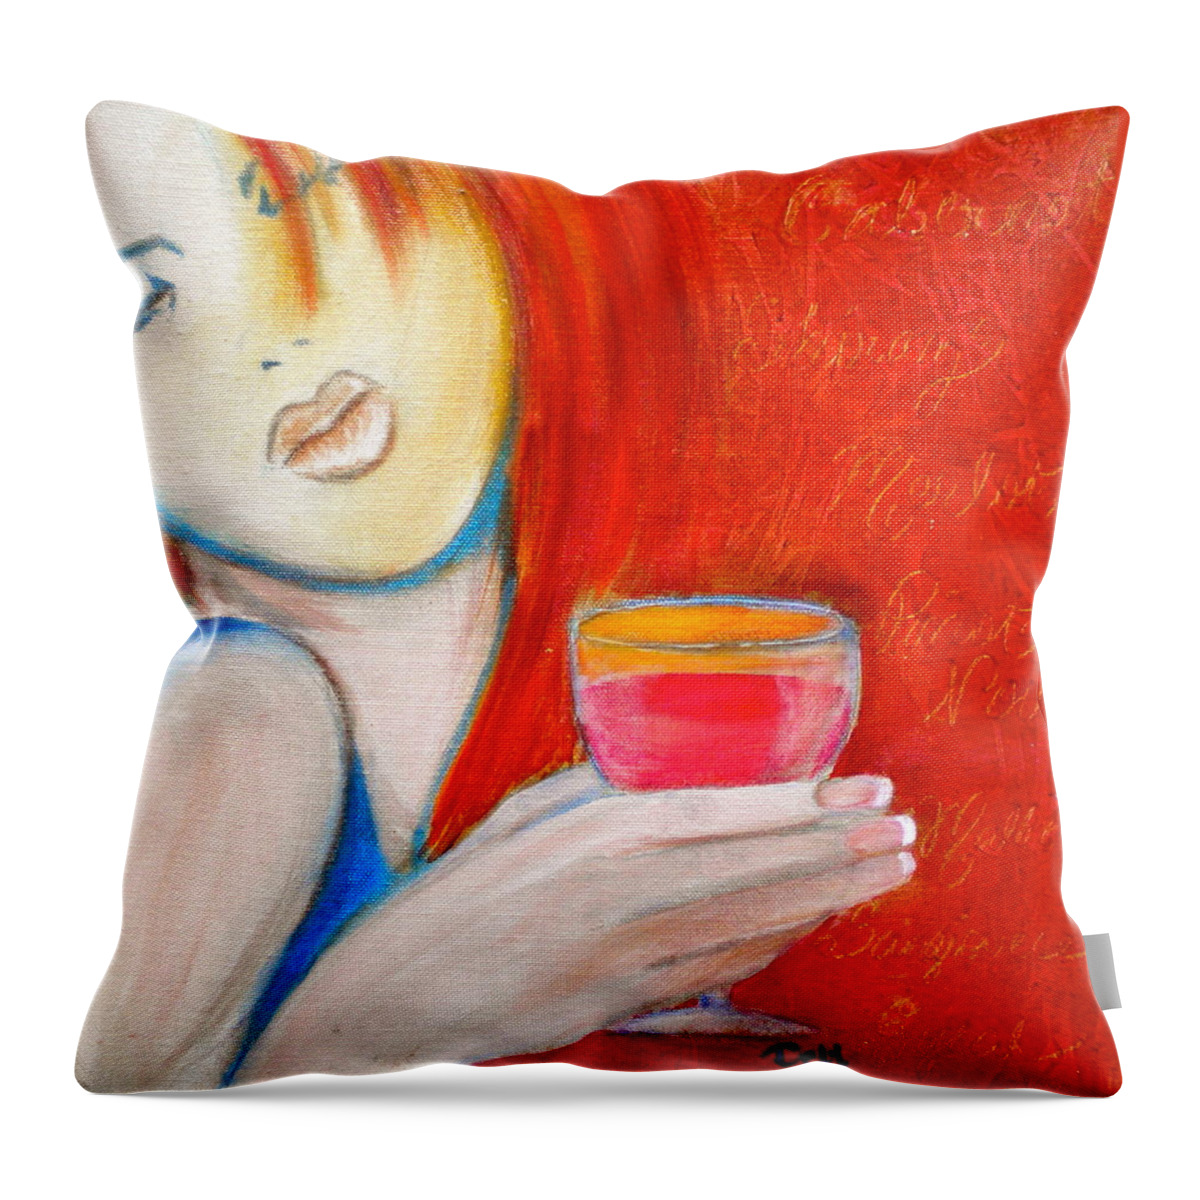 Lady Throw Pillow featuring the painting A Little Tart by Debi Starr